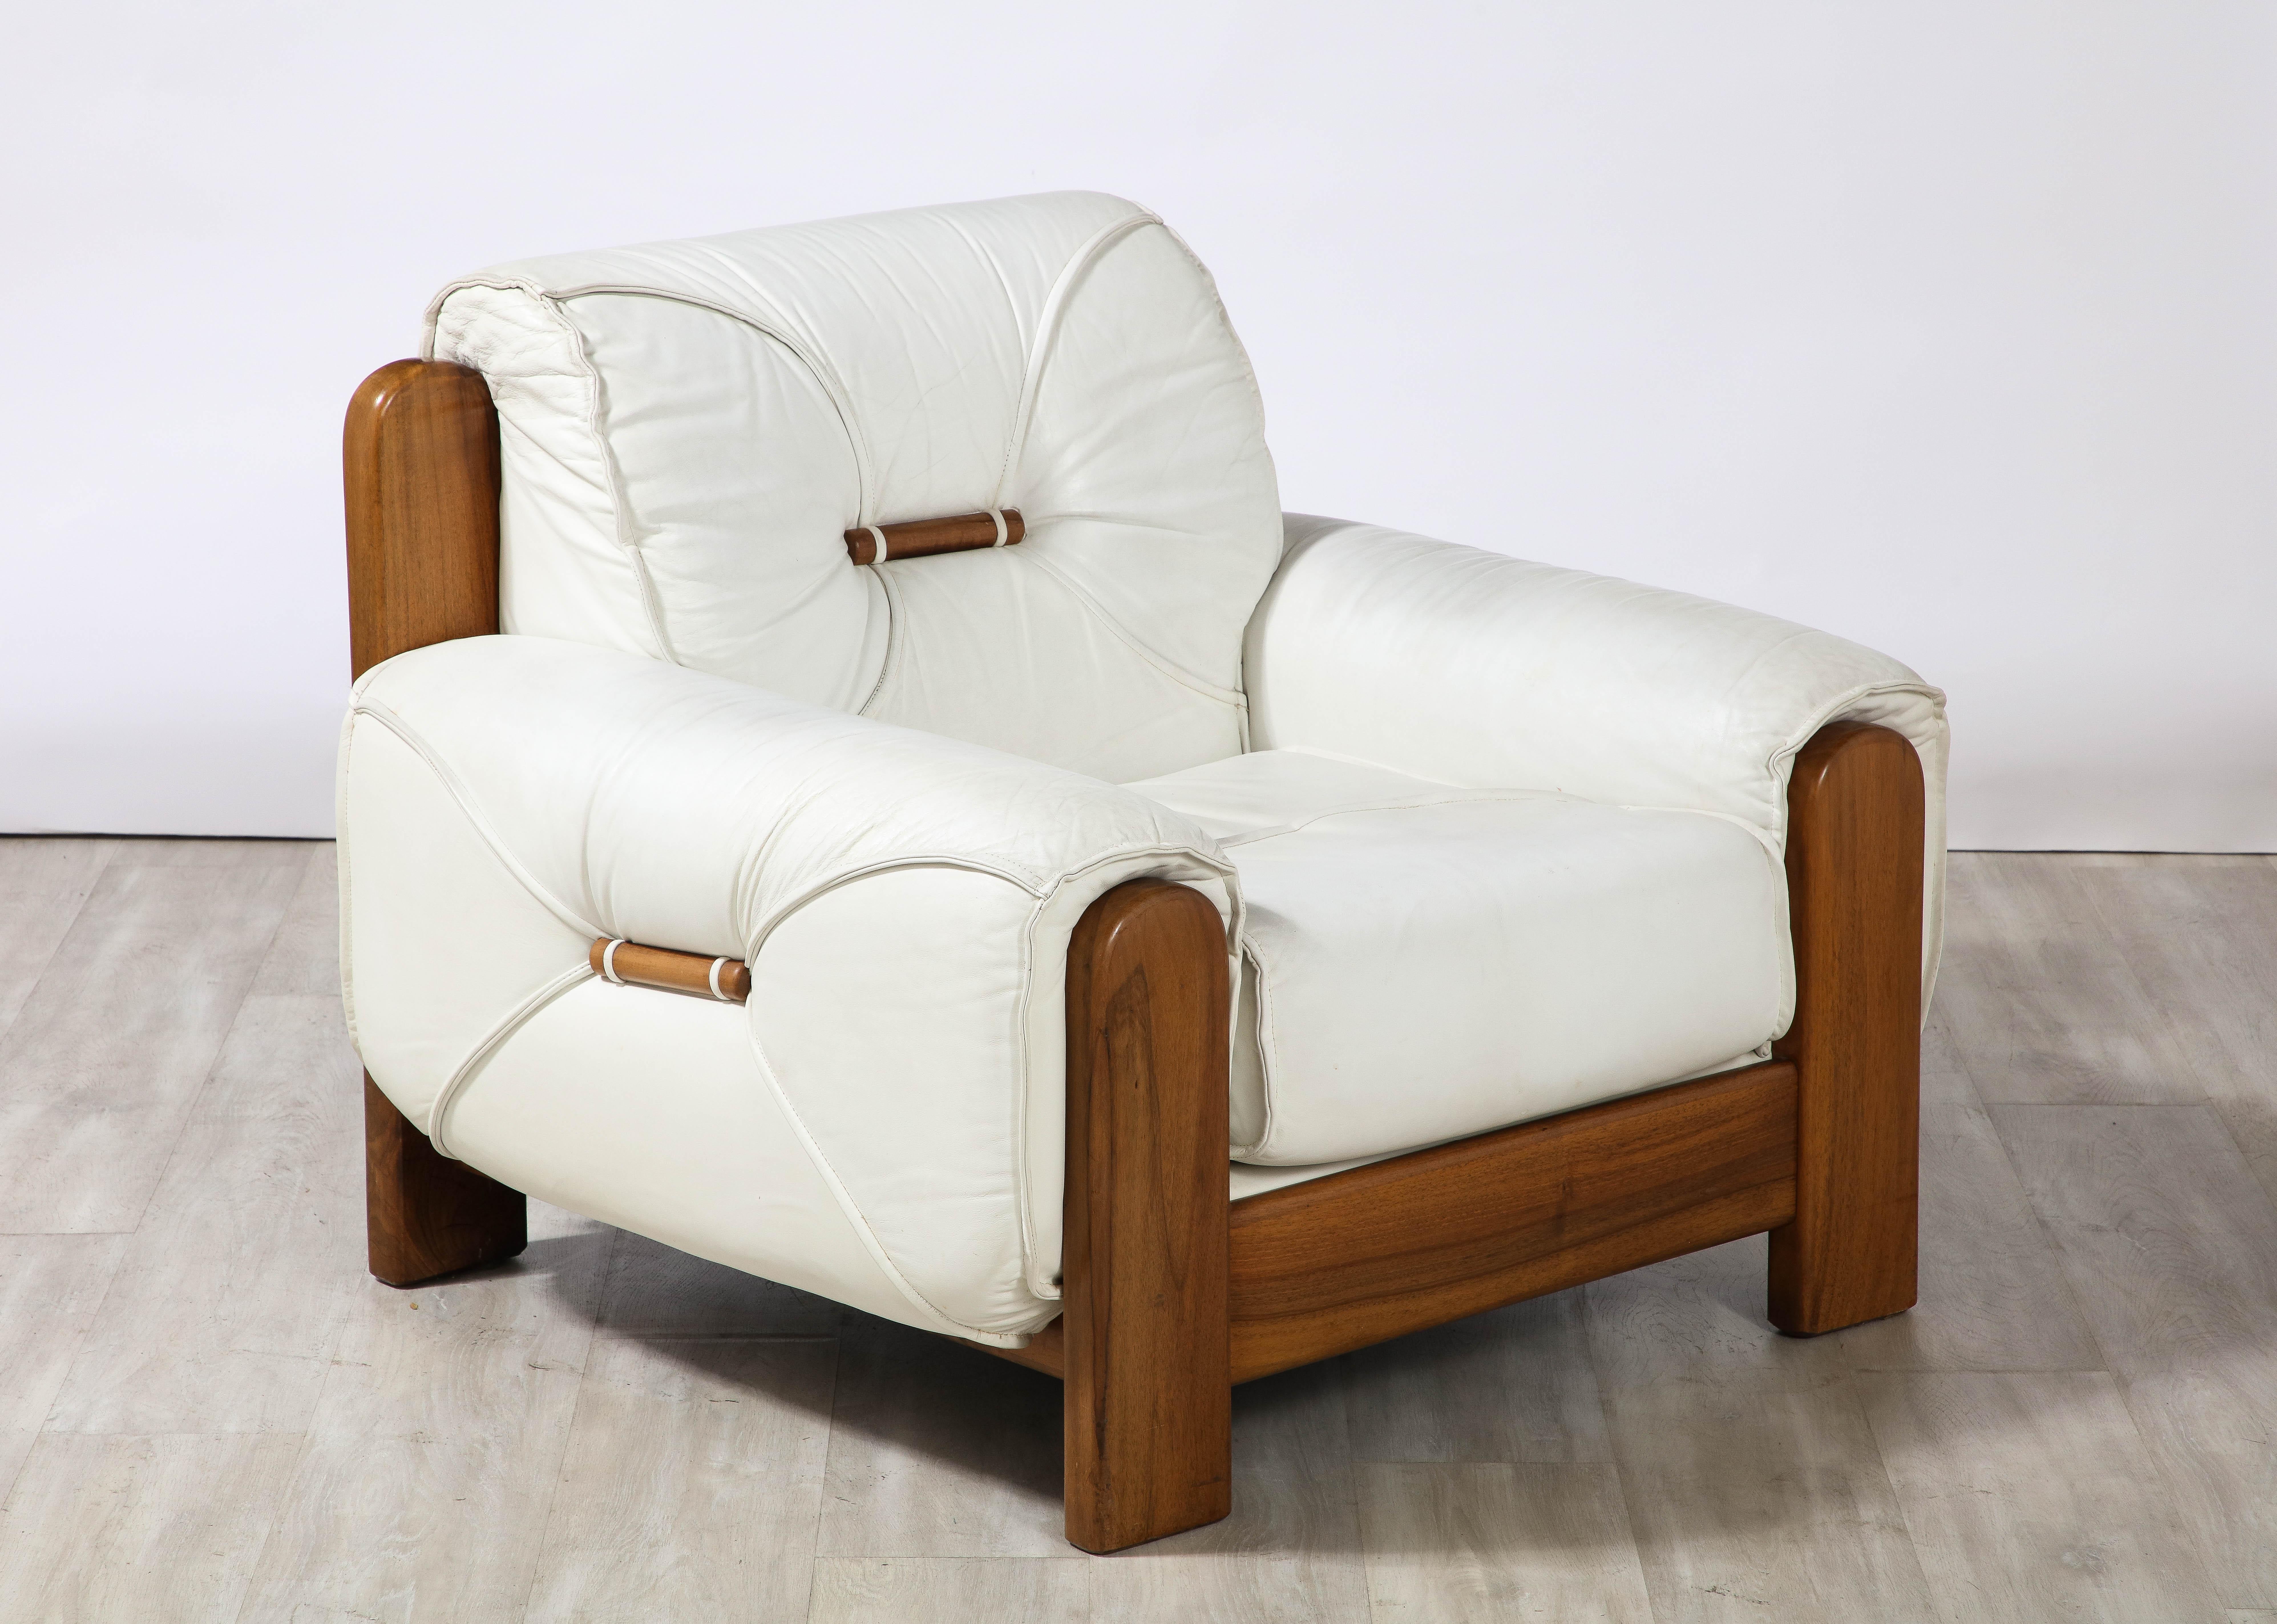 Pair of Italian 1970's Walnut and White Leather Lounge Chairs For Sale 1